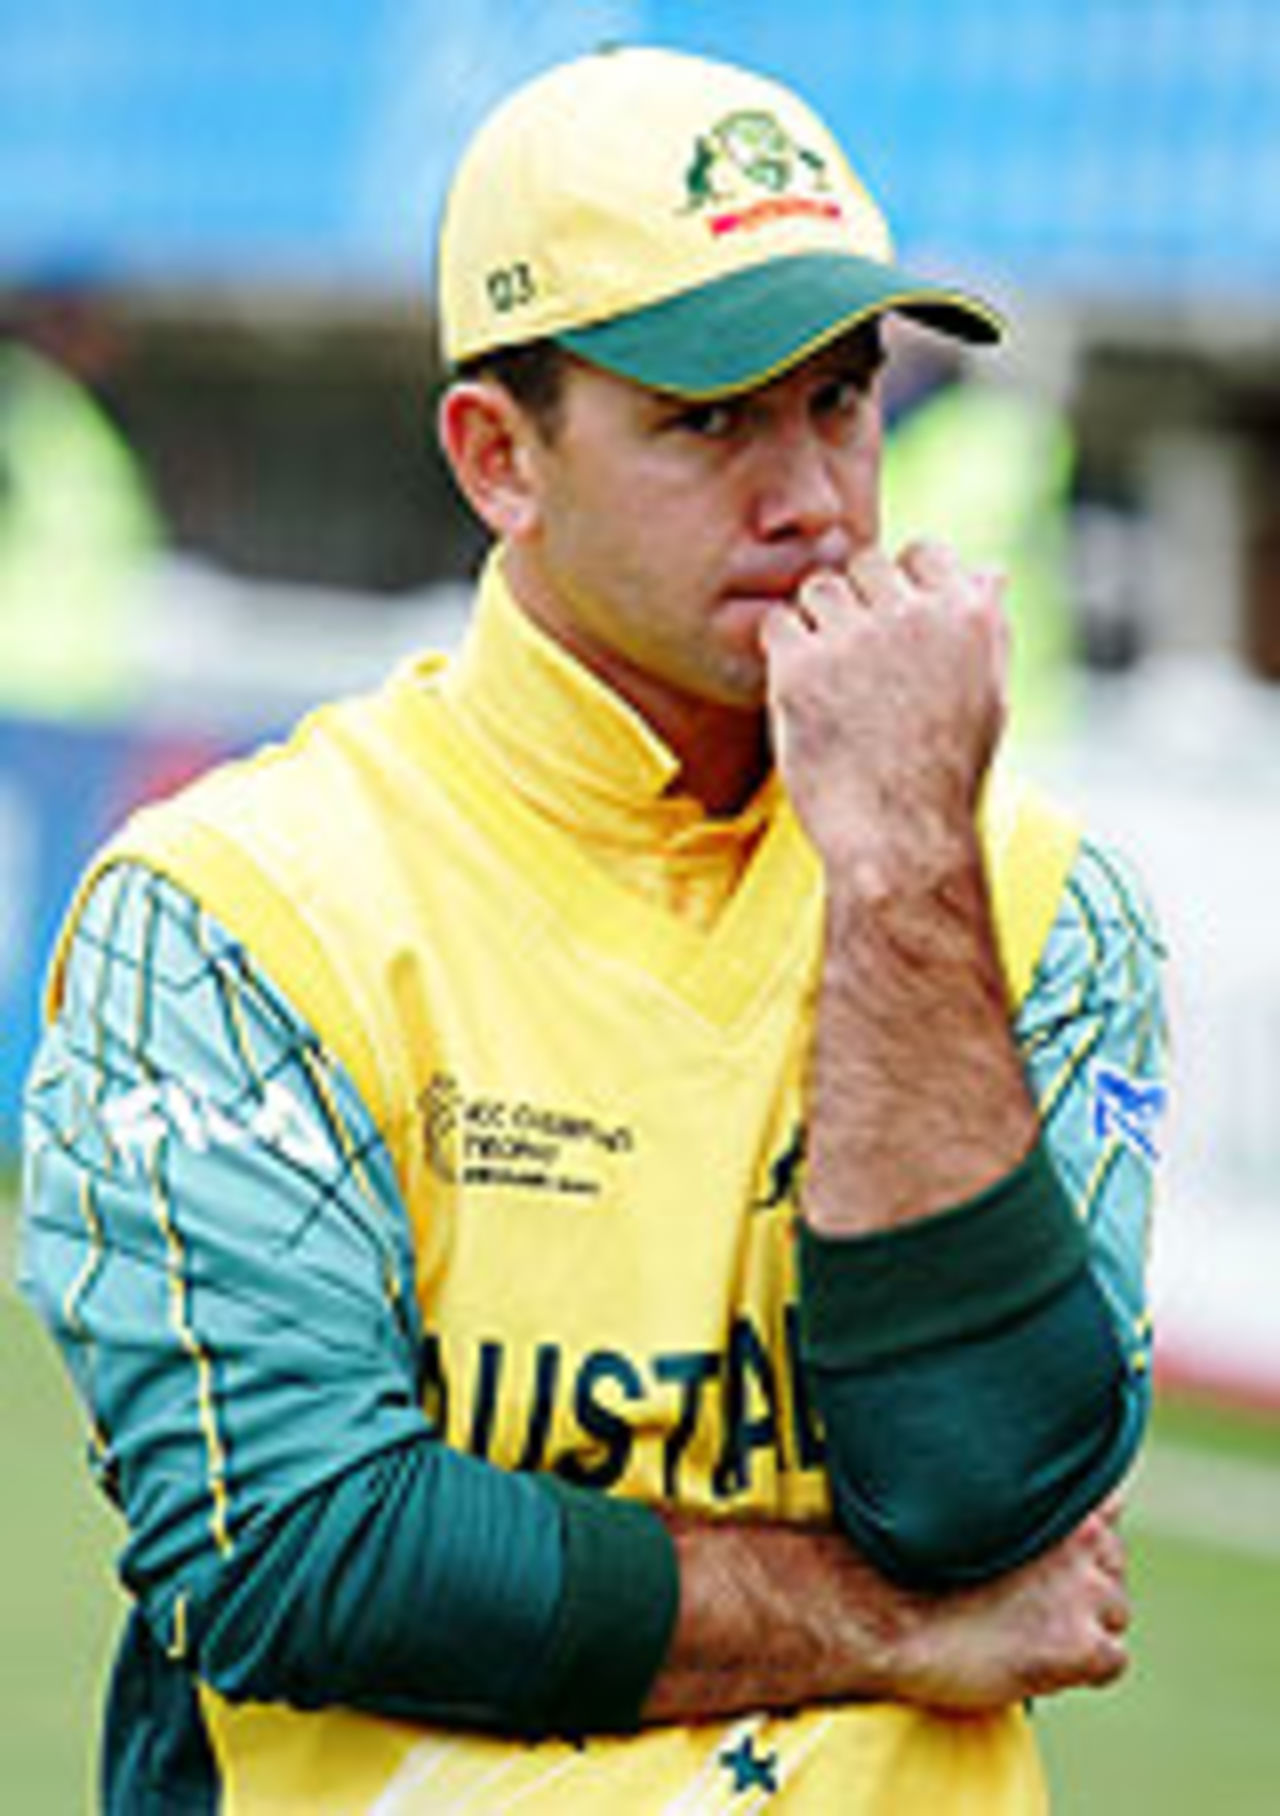 Ricky Ponting deep in thought, Edgbaston, September 21 2004